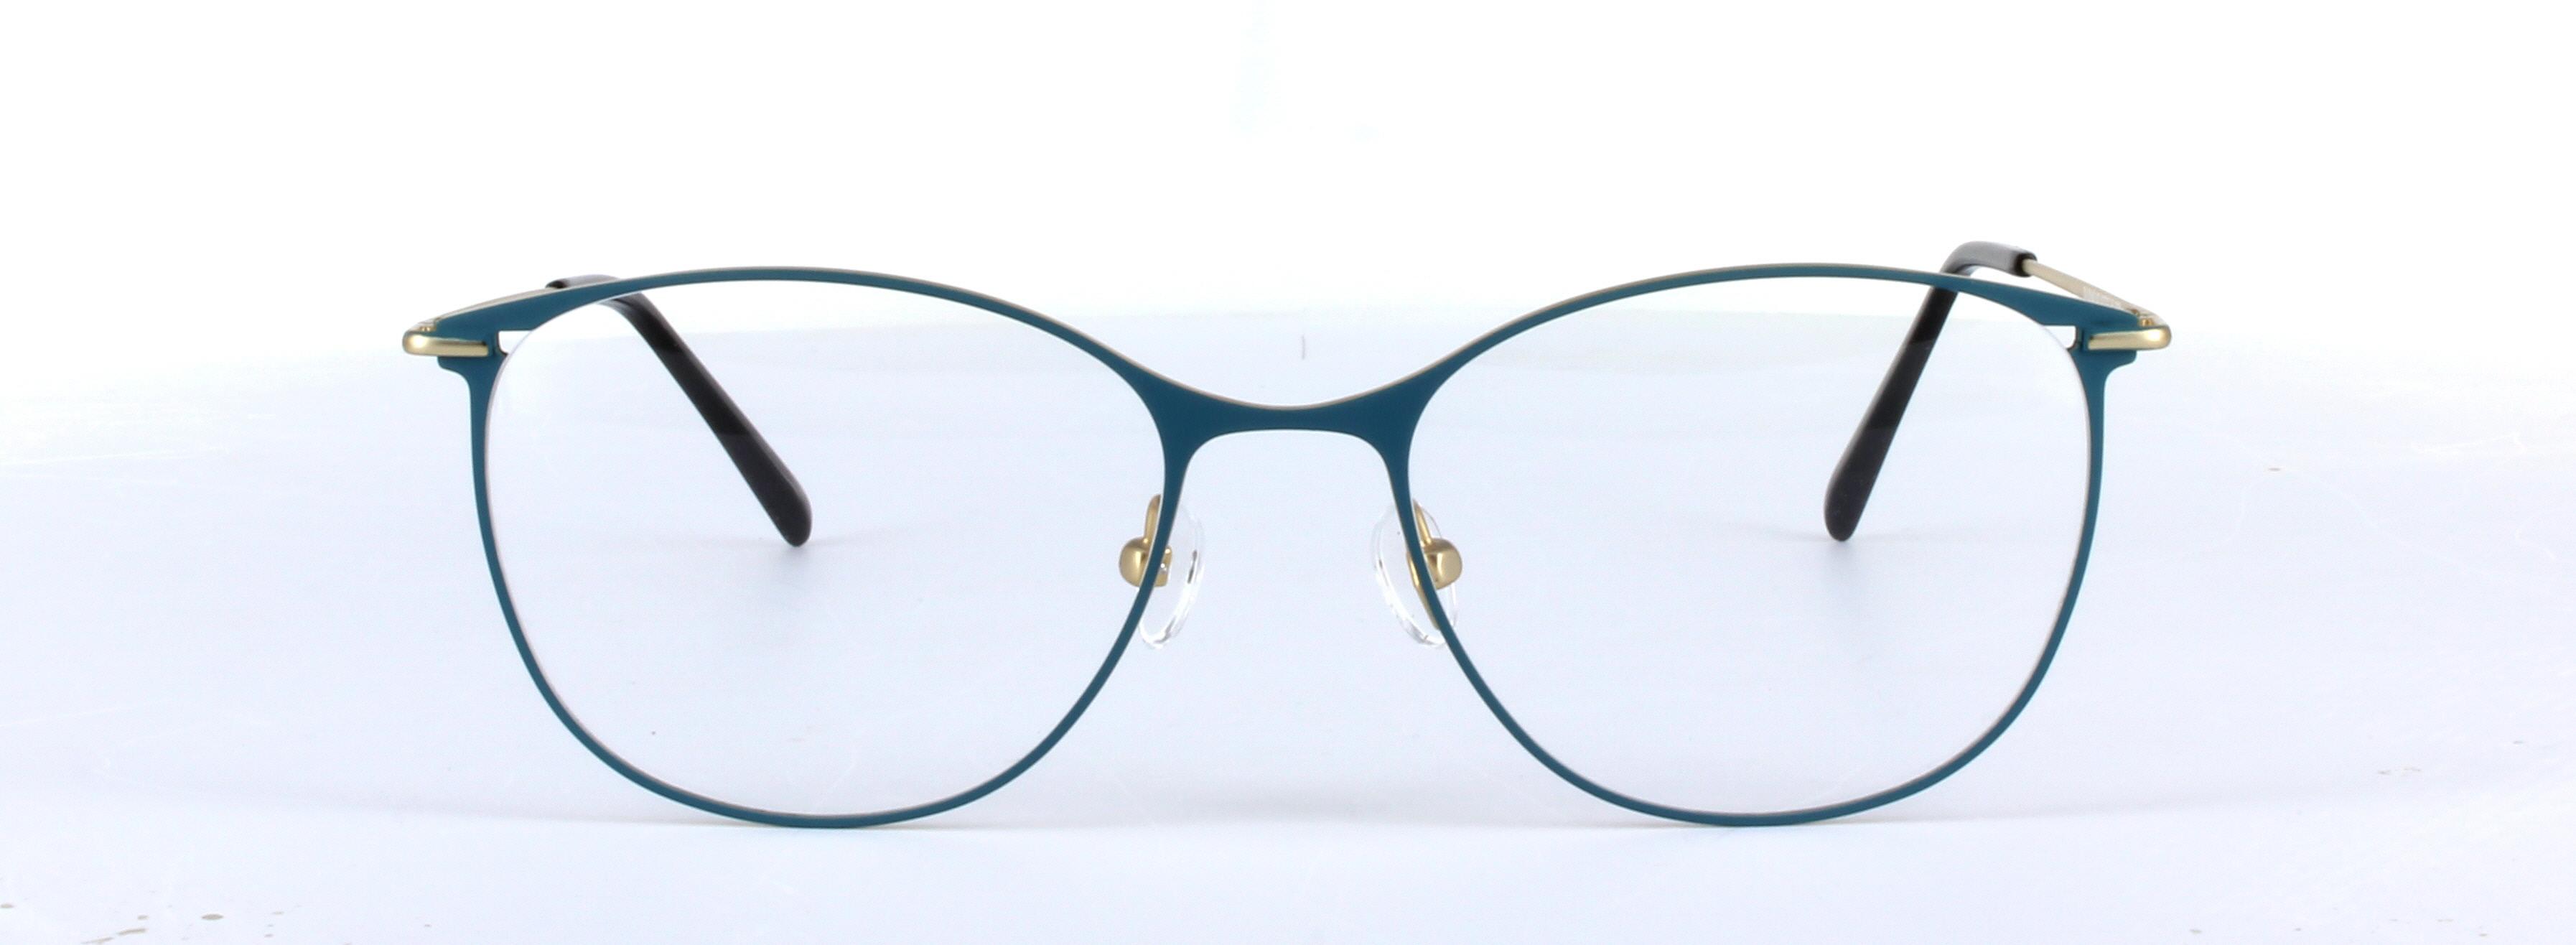 Monroe Turquoise Full Rim Oval Round Metal Glasses - Image View 5